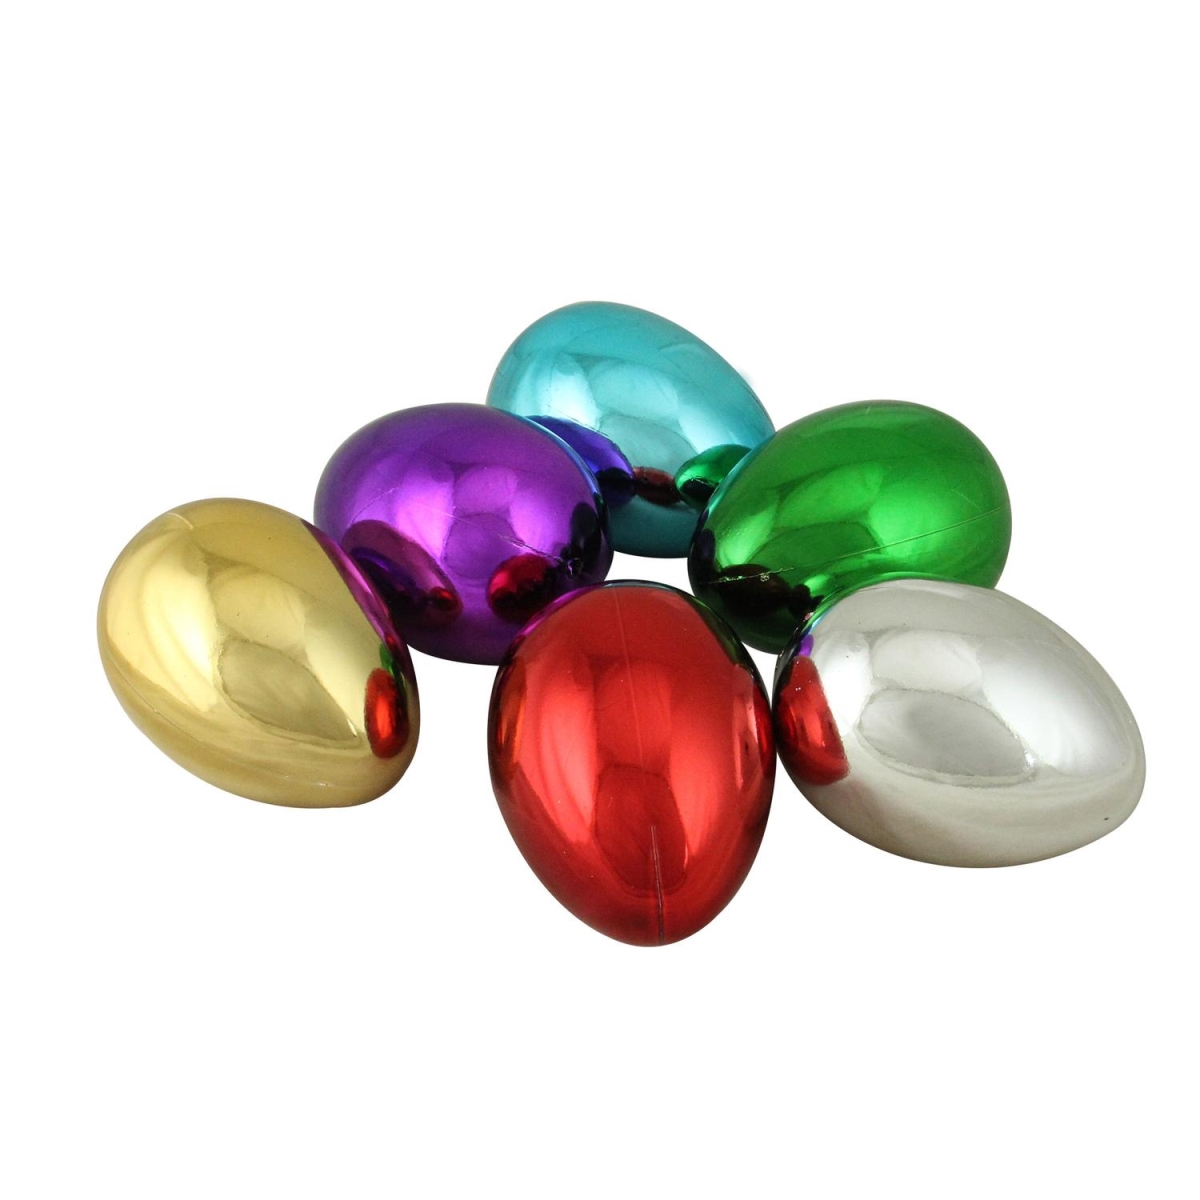 Northlight 32733329 3.5 in. Springtime Metallic Colored Medium Size Easter Egg Decorations, Set of 6